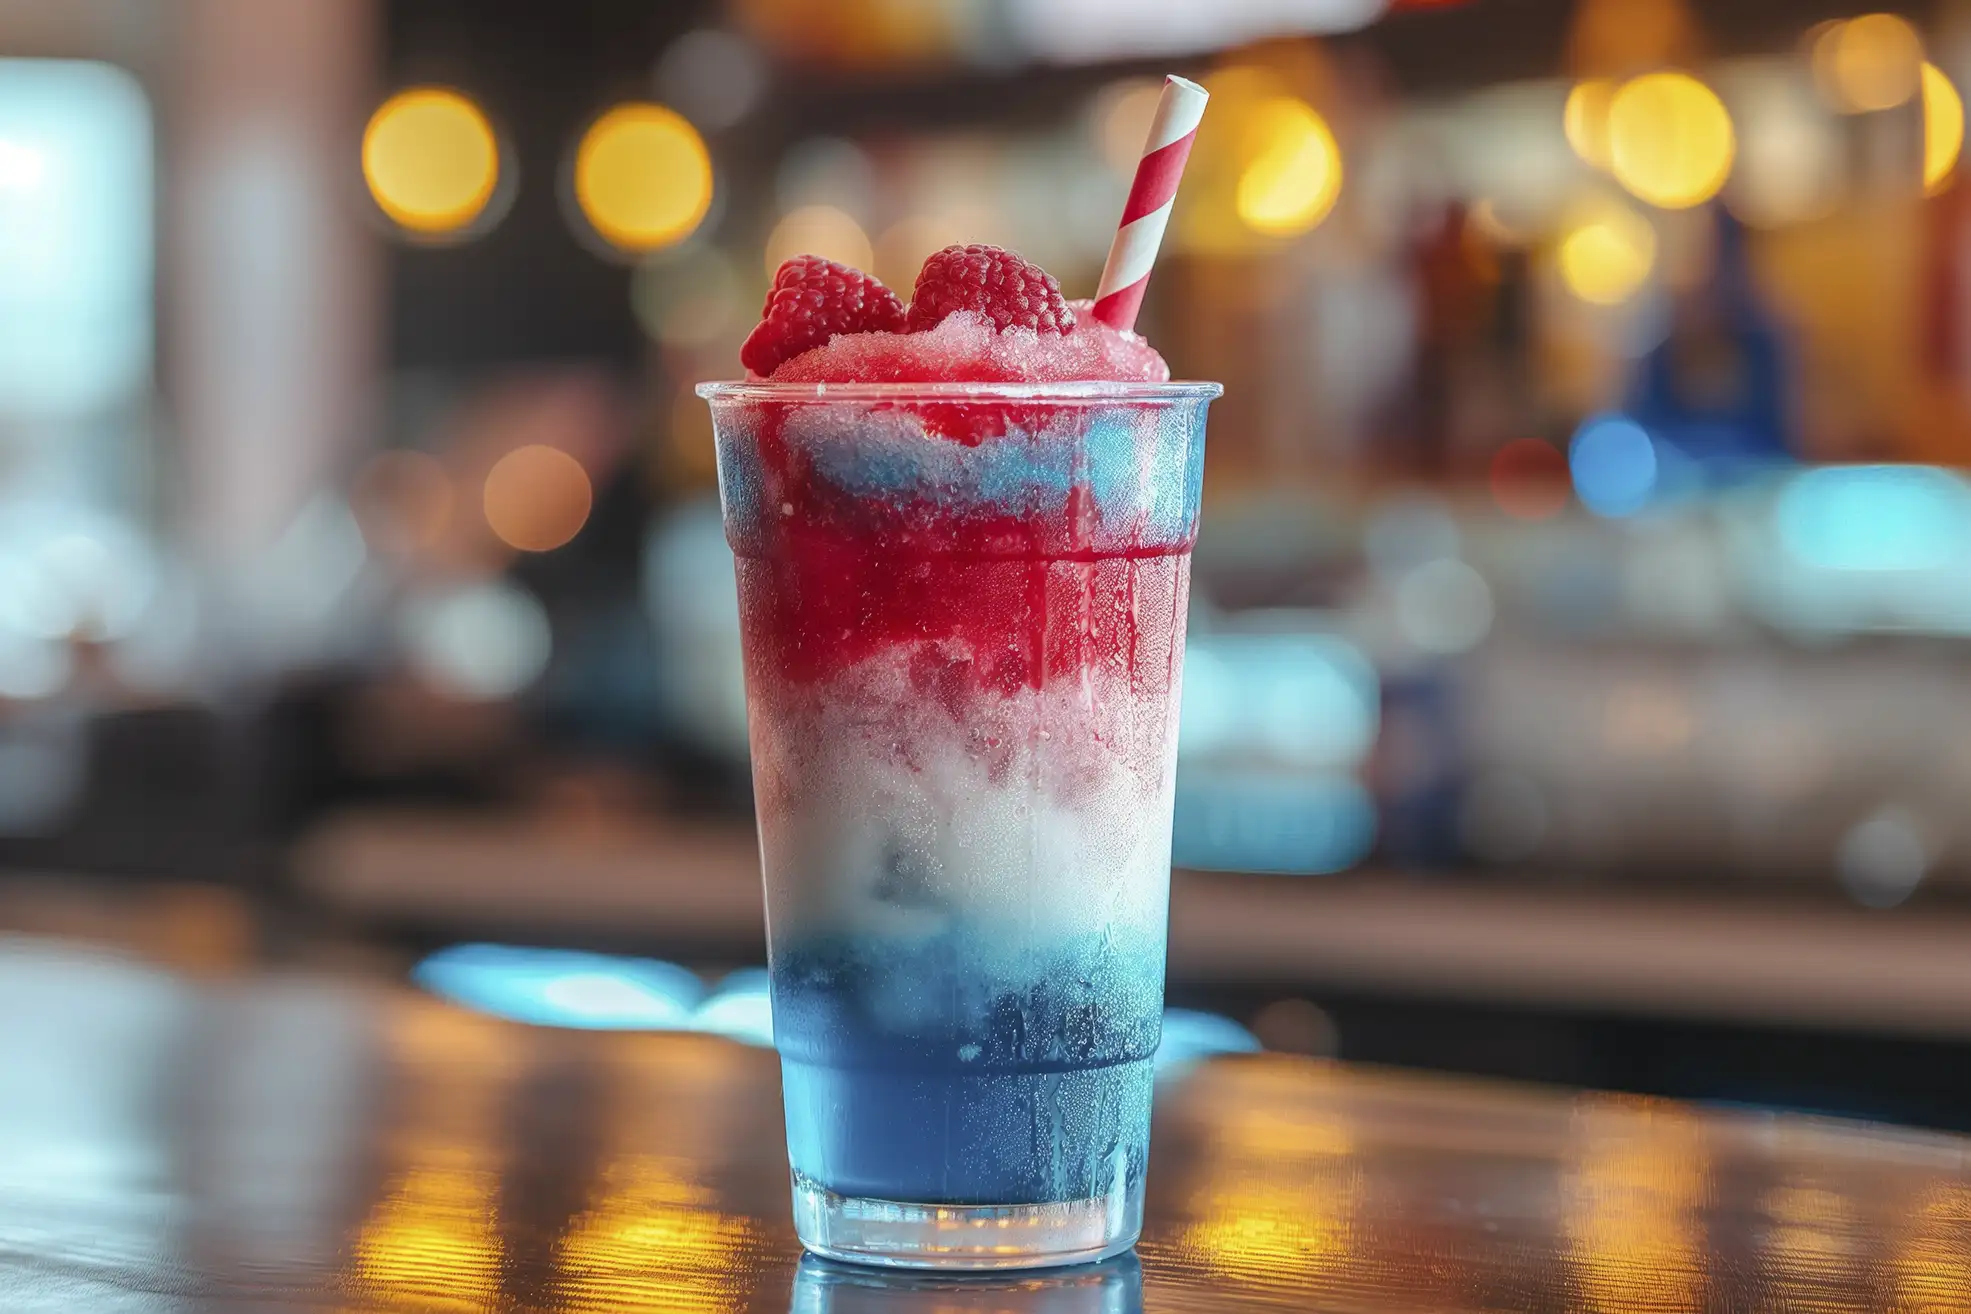 The Top 5 Most Festive 4th of July Cocktails